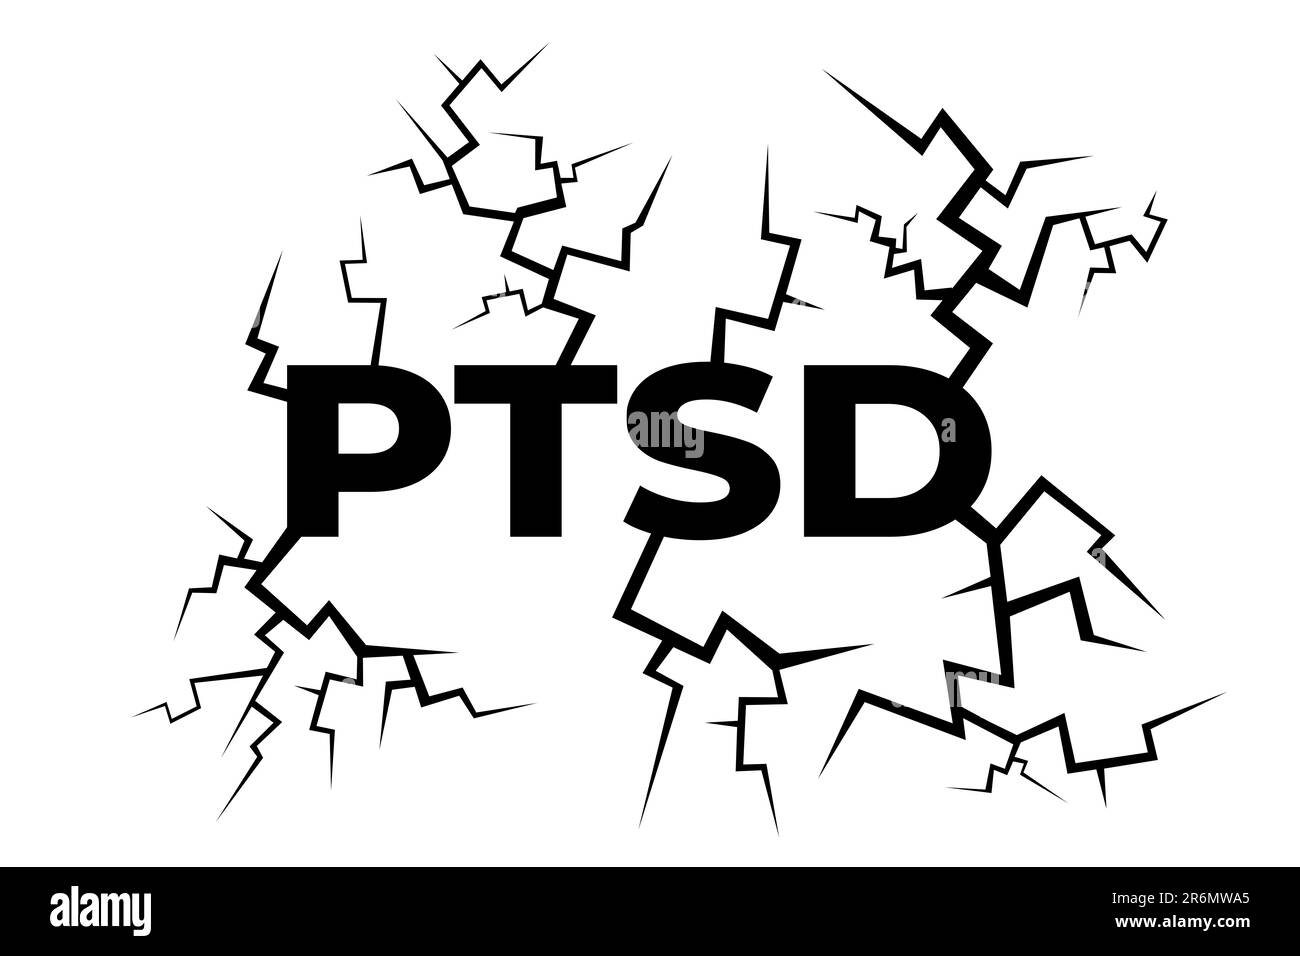 PTSD and post traumatic stress disorder - text and cracks as metaphor of mental pain, harm and stress. Vector illustration of text on white background Stock Photo